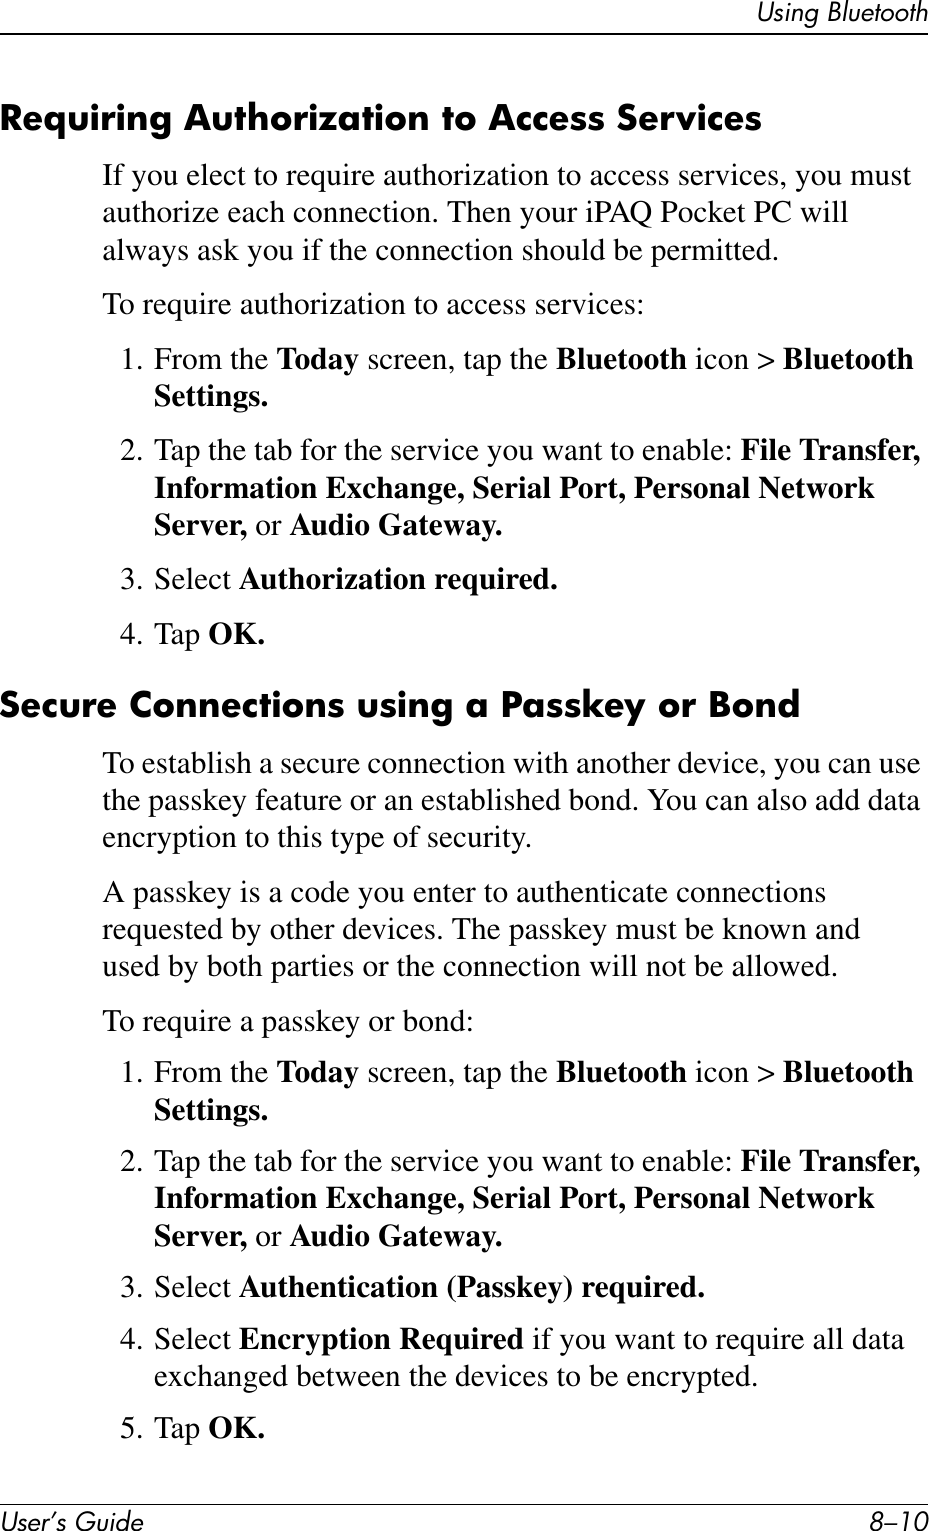 User’s Guide 8–10Using BluetoothRequiring Authorization to Access ServicesIf you elect to require authorization to access services, you must authorize each connection. Then your iPAQ Pocket PC will always ask you if the connection should be permitted.To require authorization to access services:1. From the Today screen, tap the Bluetooth icon &gt; Bluetooth Settings.2. Tap the tab for the service you want to enable: File Transfer, Information Exchange, Serial Port, Personal Network Server, or Audio Gateway.3. Select Authorization required.4. Tap OK.Secure Connections using a Passkey or Bond To establish a secure connection with another device, you can use the passkey feature or an established bond. You can also add data encryption to this type of security.A passkey is a code you enter to authenticate connections requested by other devices. The passkey must be known and used by both parties or the connection will not be allowed.To require a passkey or bond:1. From the Today screen, tap the Bluetooth icon &gt; Bluetooth Settings.2. Tap the tab for the service you want to enable: File Transfer, Information Exchange, Serial Port, Personal Network Server, or Audio Gateway.3. Select Authentication (Passkey) required.4. Select Encryption Required if you want to require all data exchanged between the devices to be encrypted.5. Tap OK.